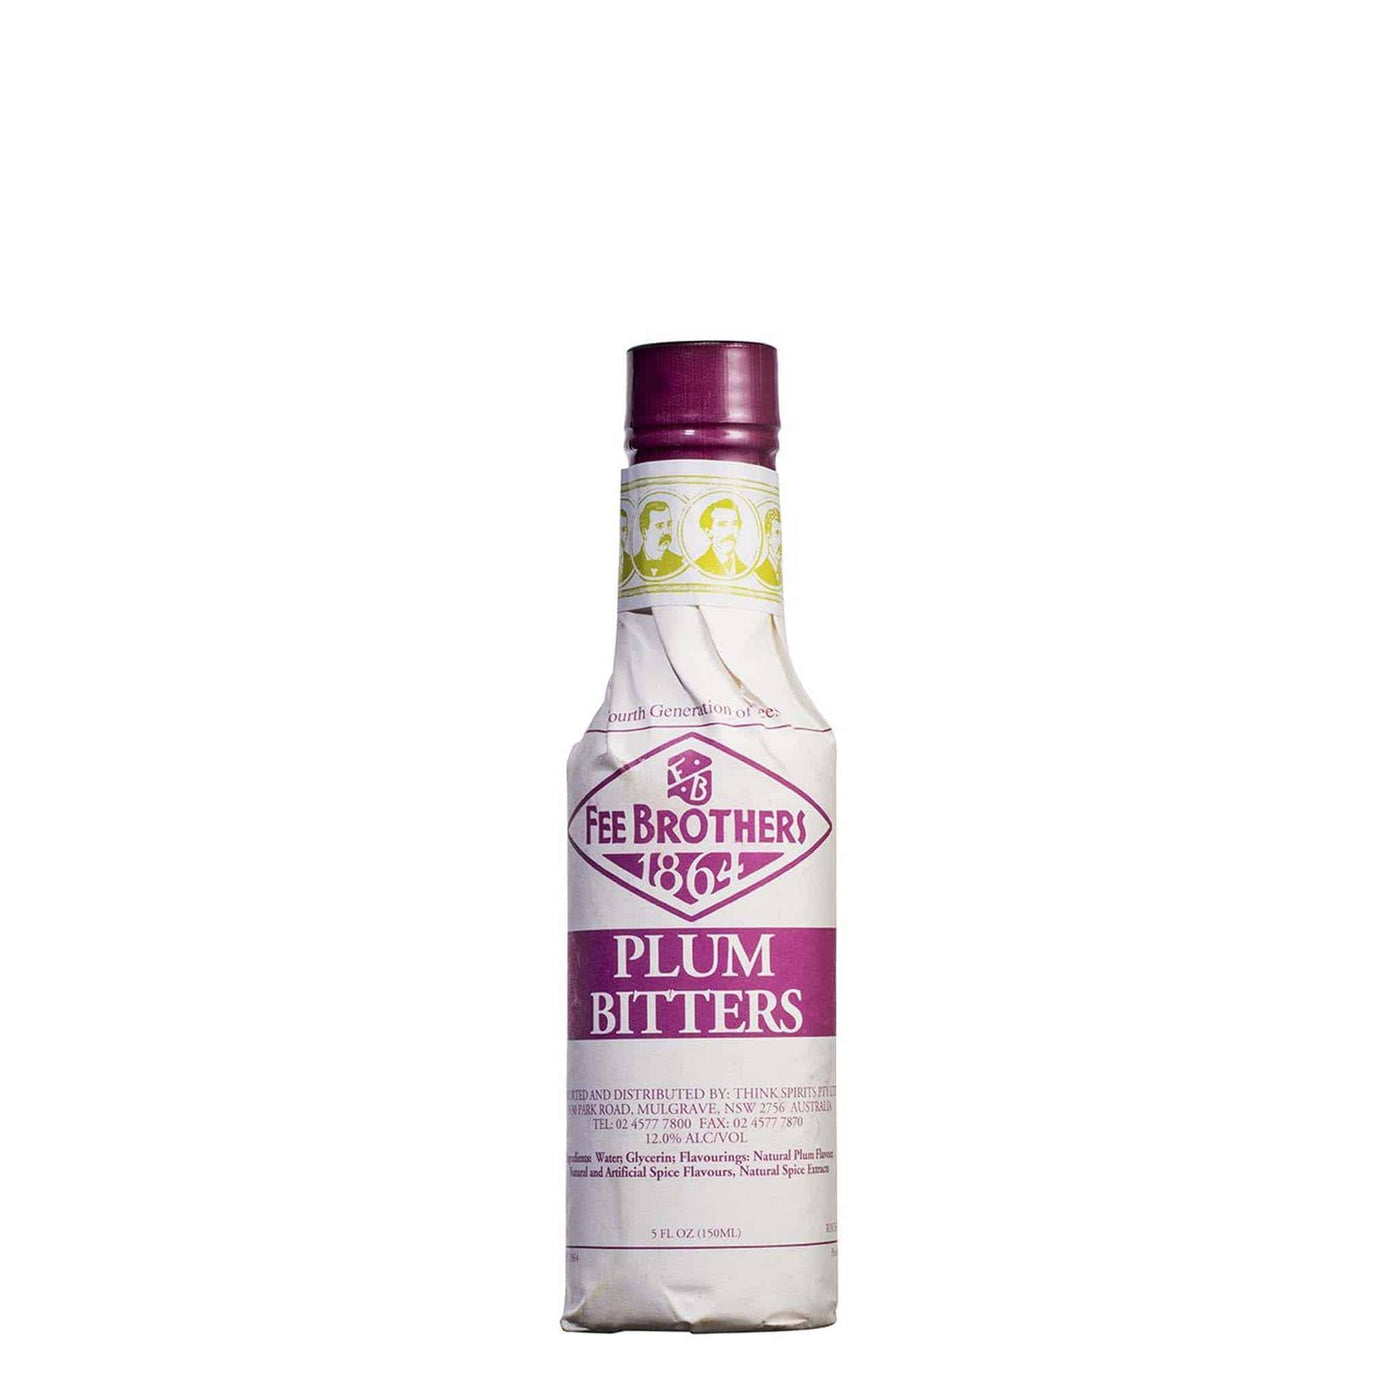 Fee Brothers Plum Bitters - Spiritly